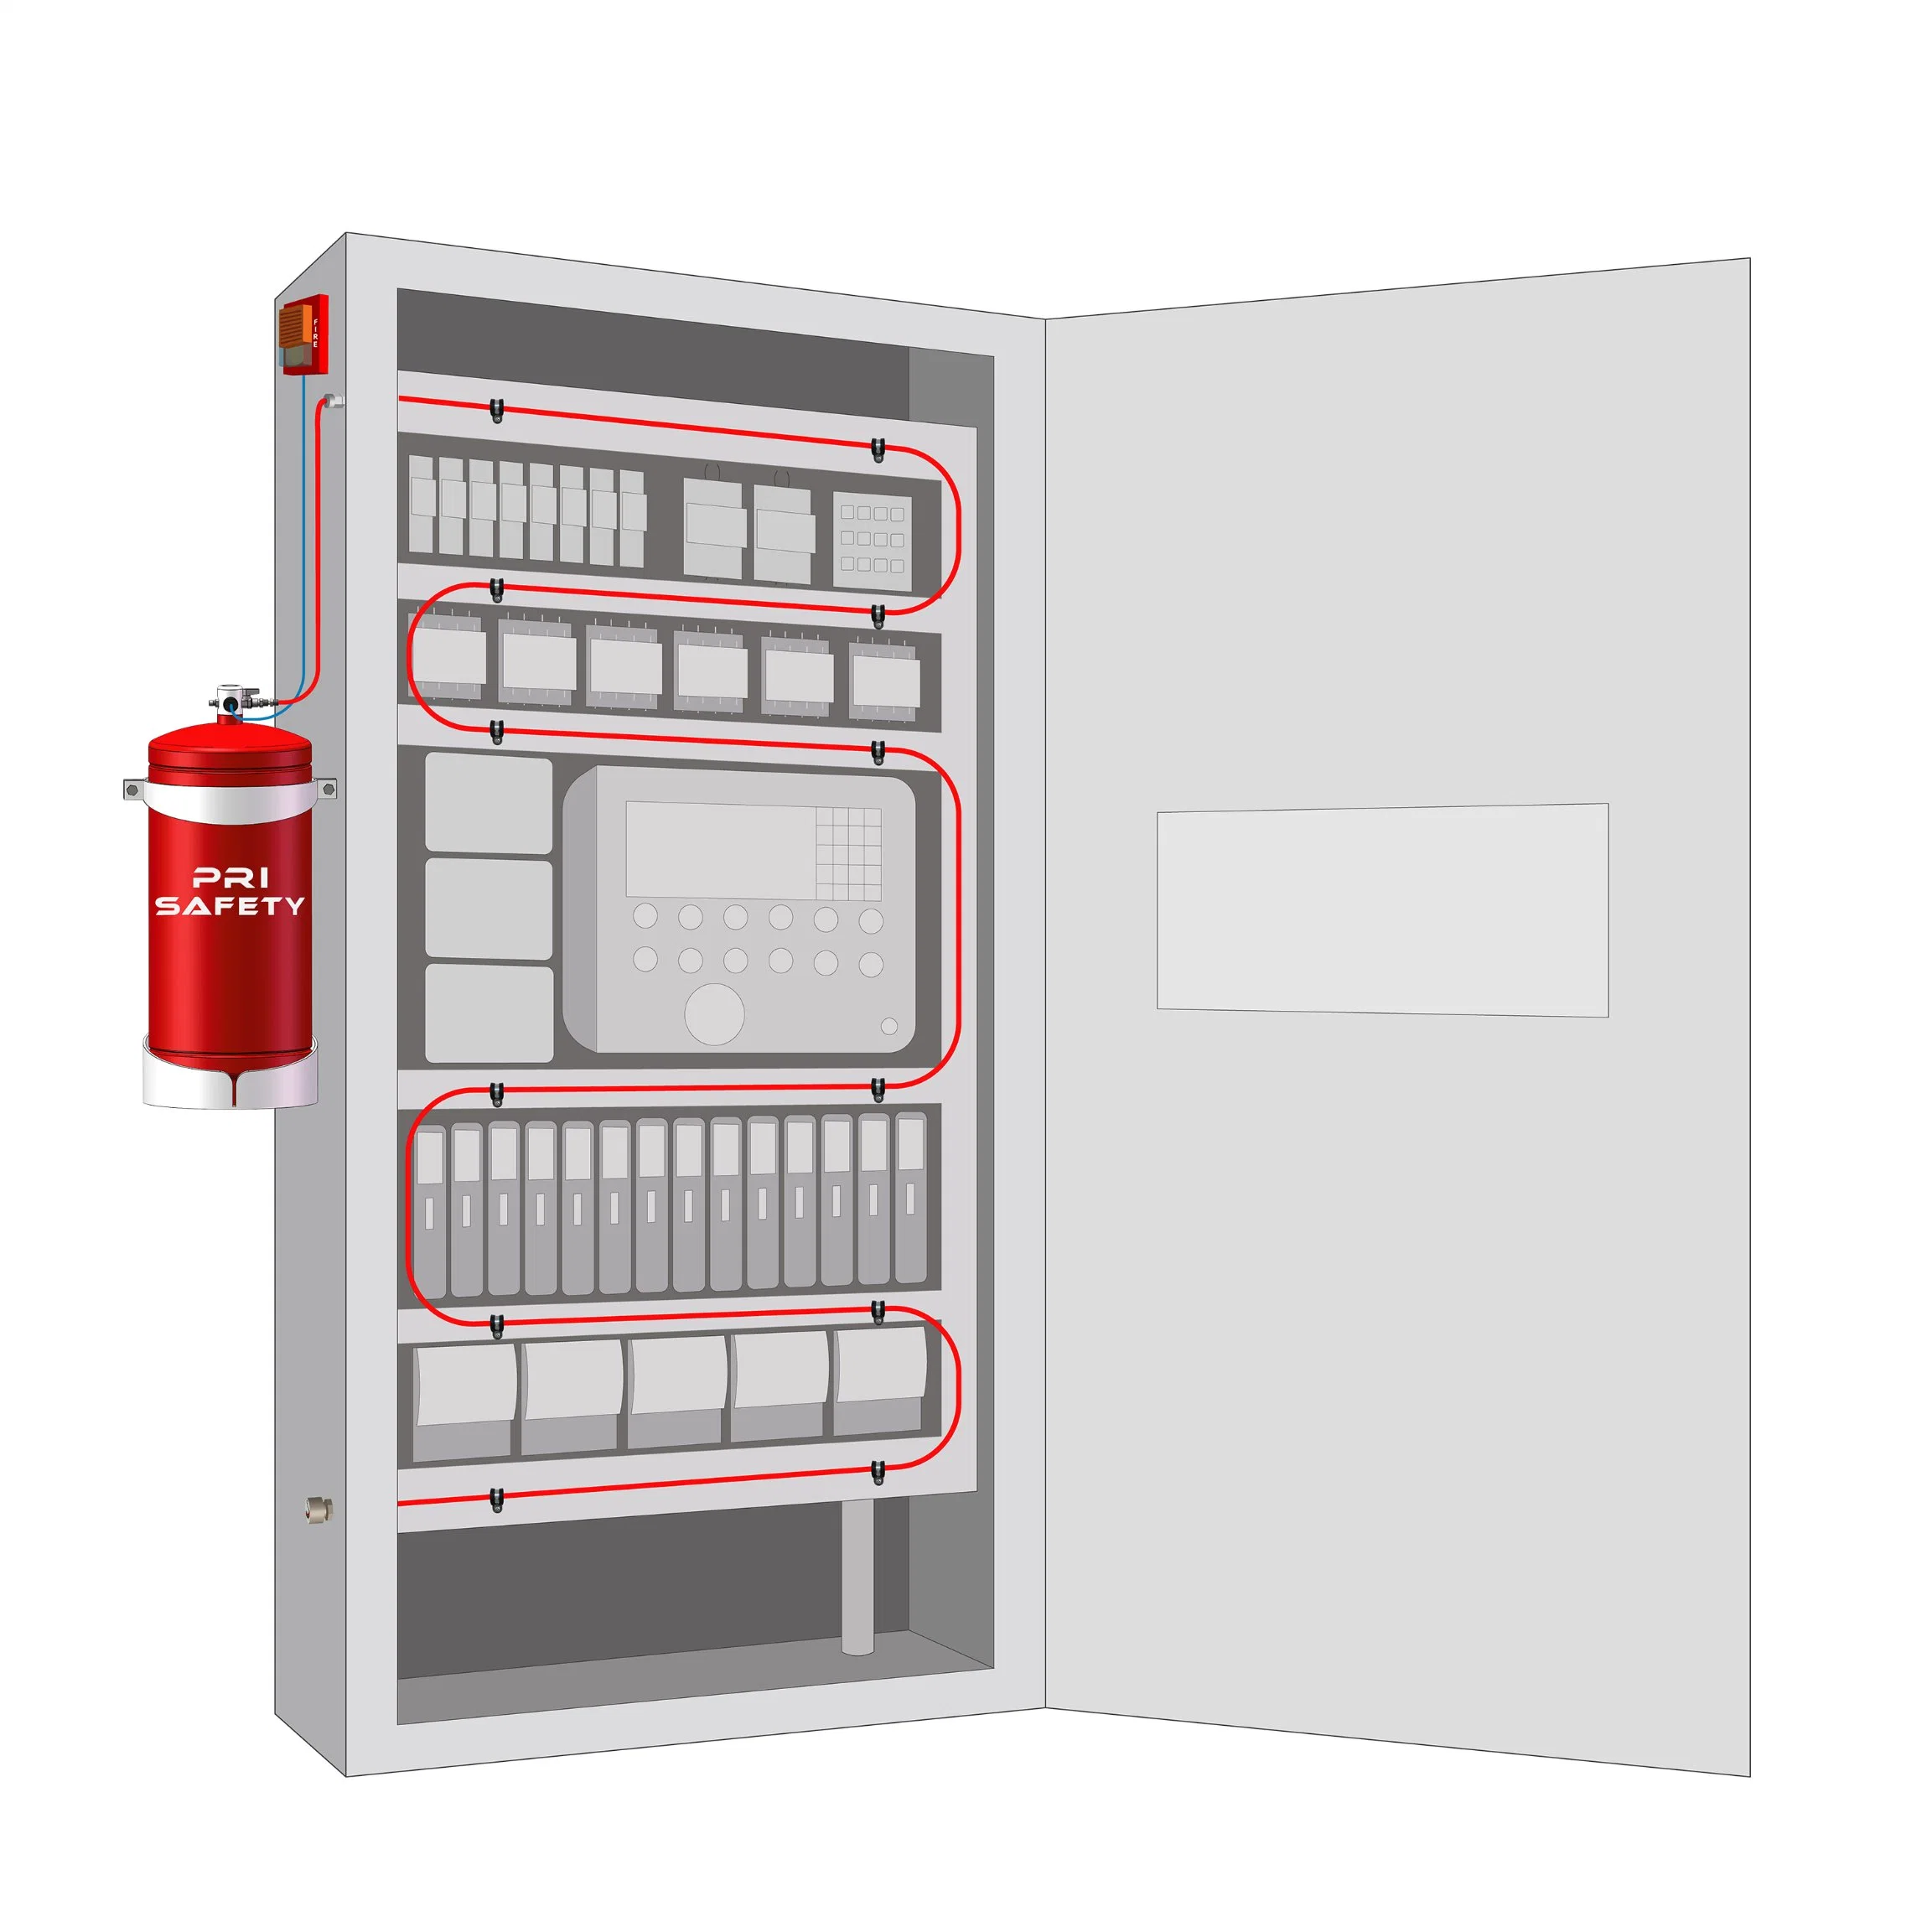 Automatic Fire Suppression Systems for Electrical Cabinet, Board